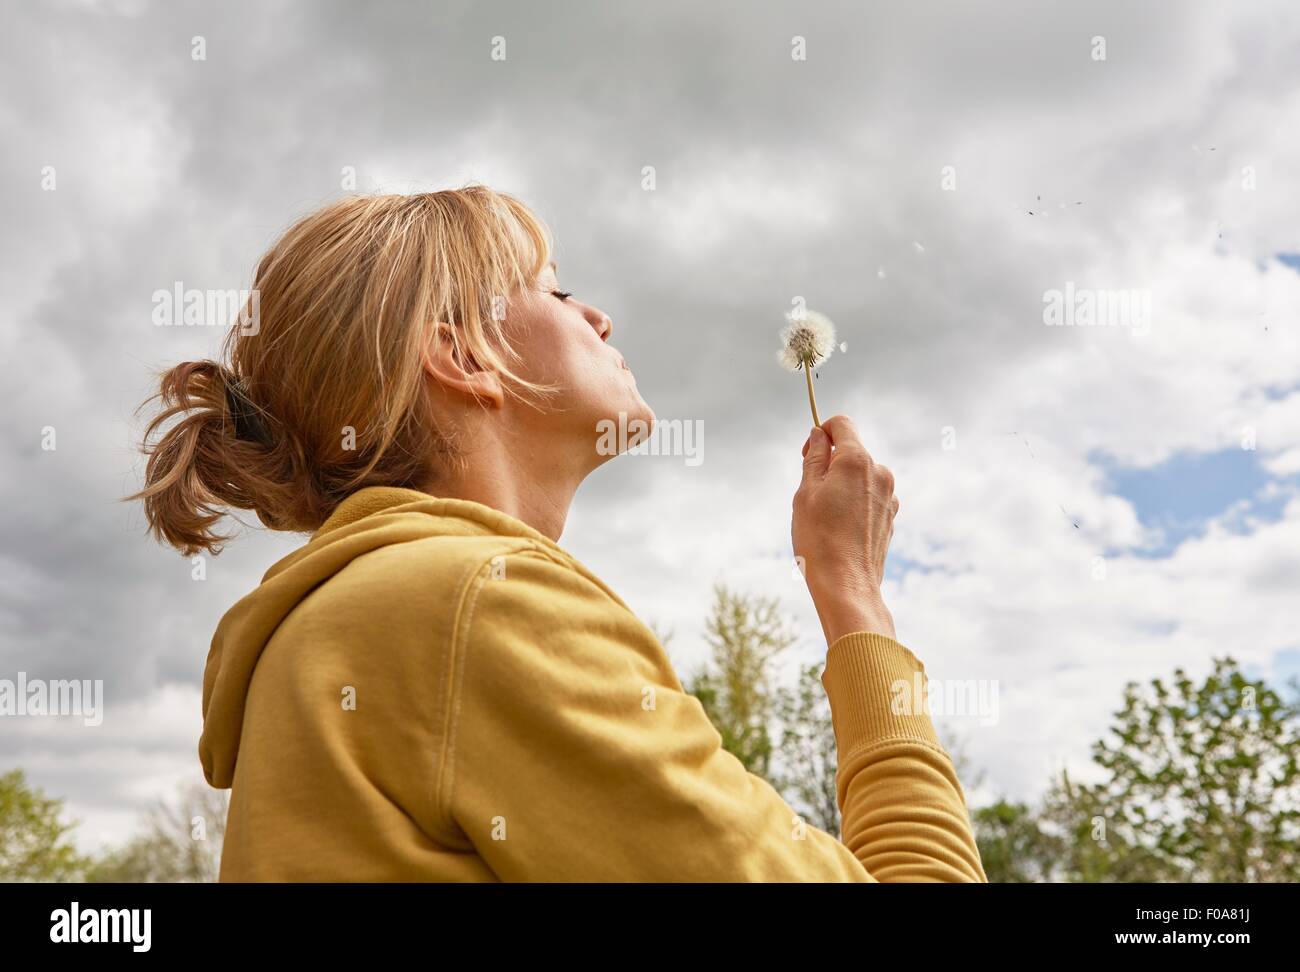 Mature woman blowing seeds off dandelion, low angle view Stock Photo